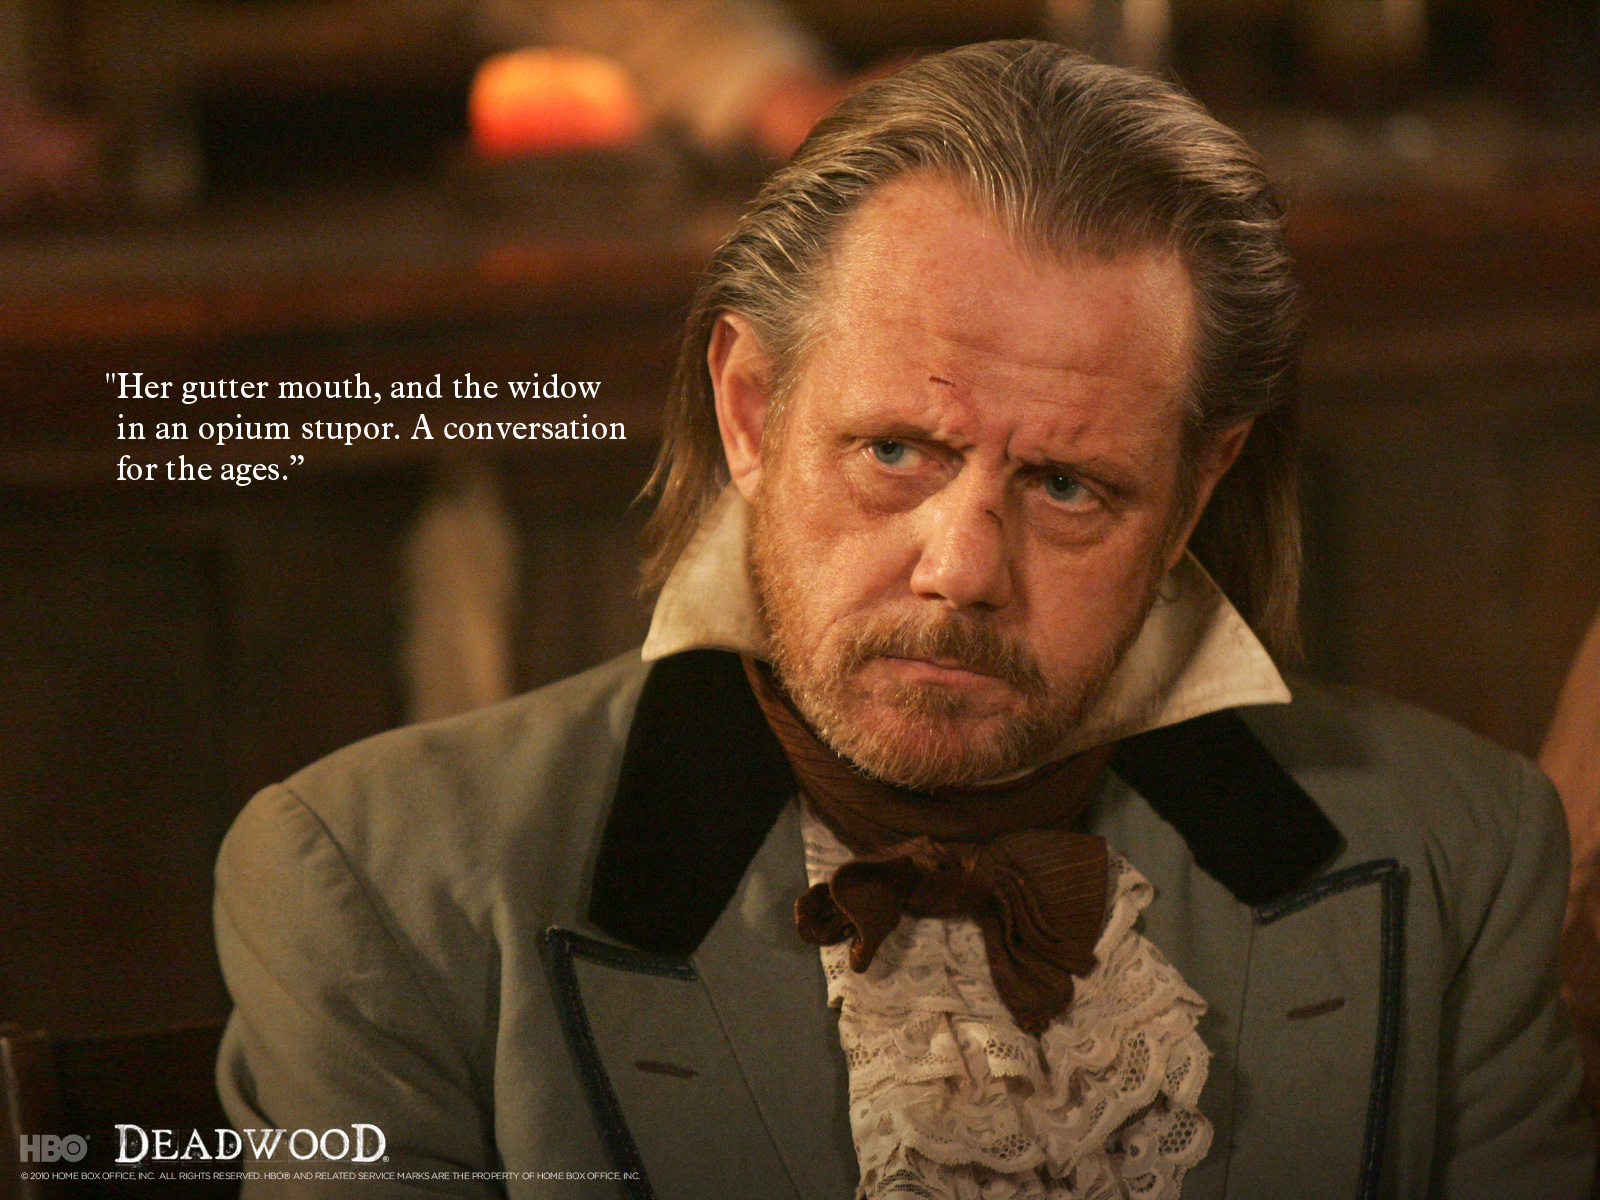 Wallpaper ID: 1772277 / deadwood, 1080P, hbo, drama, television, western  free download